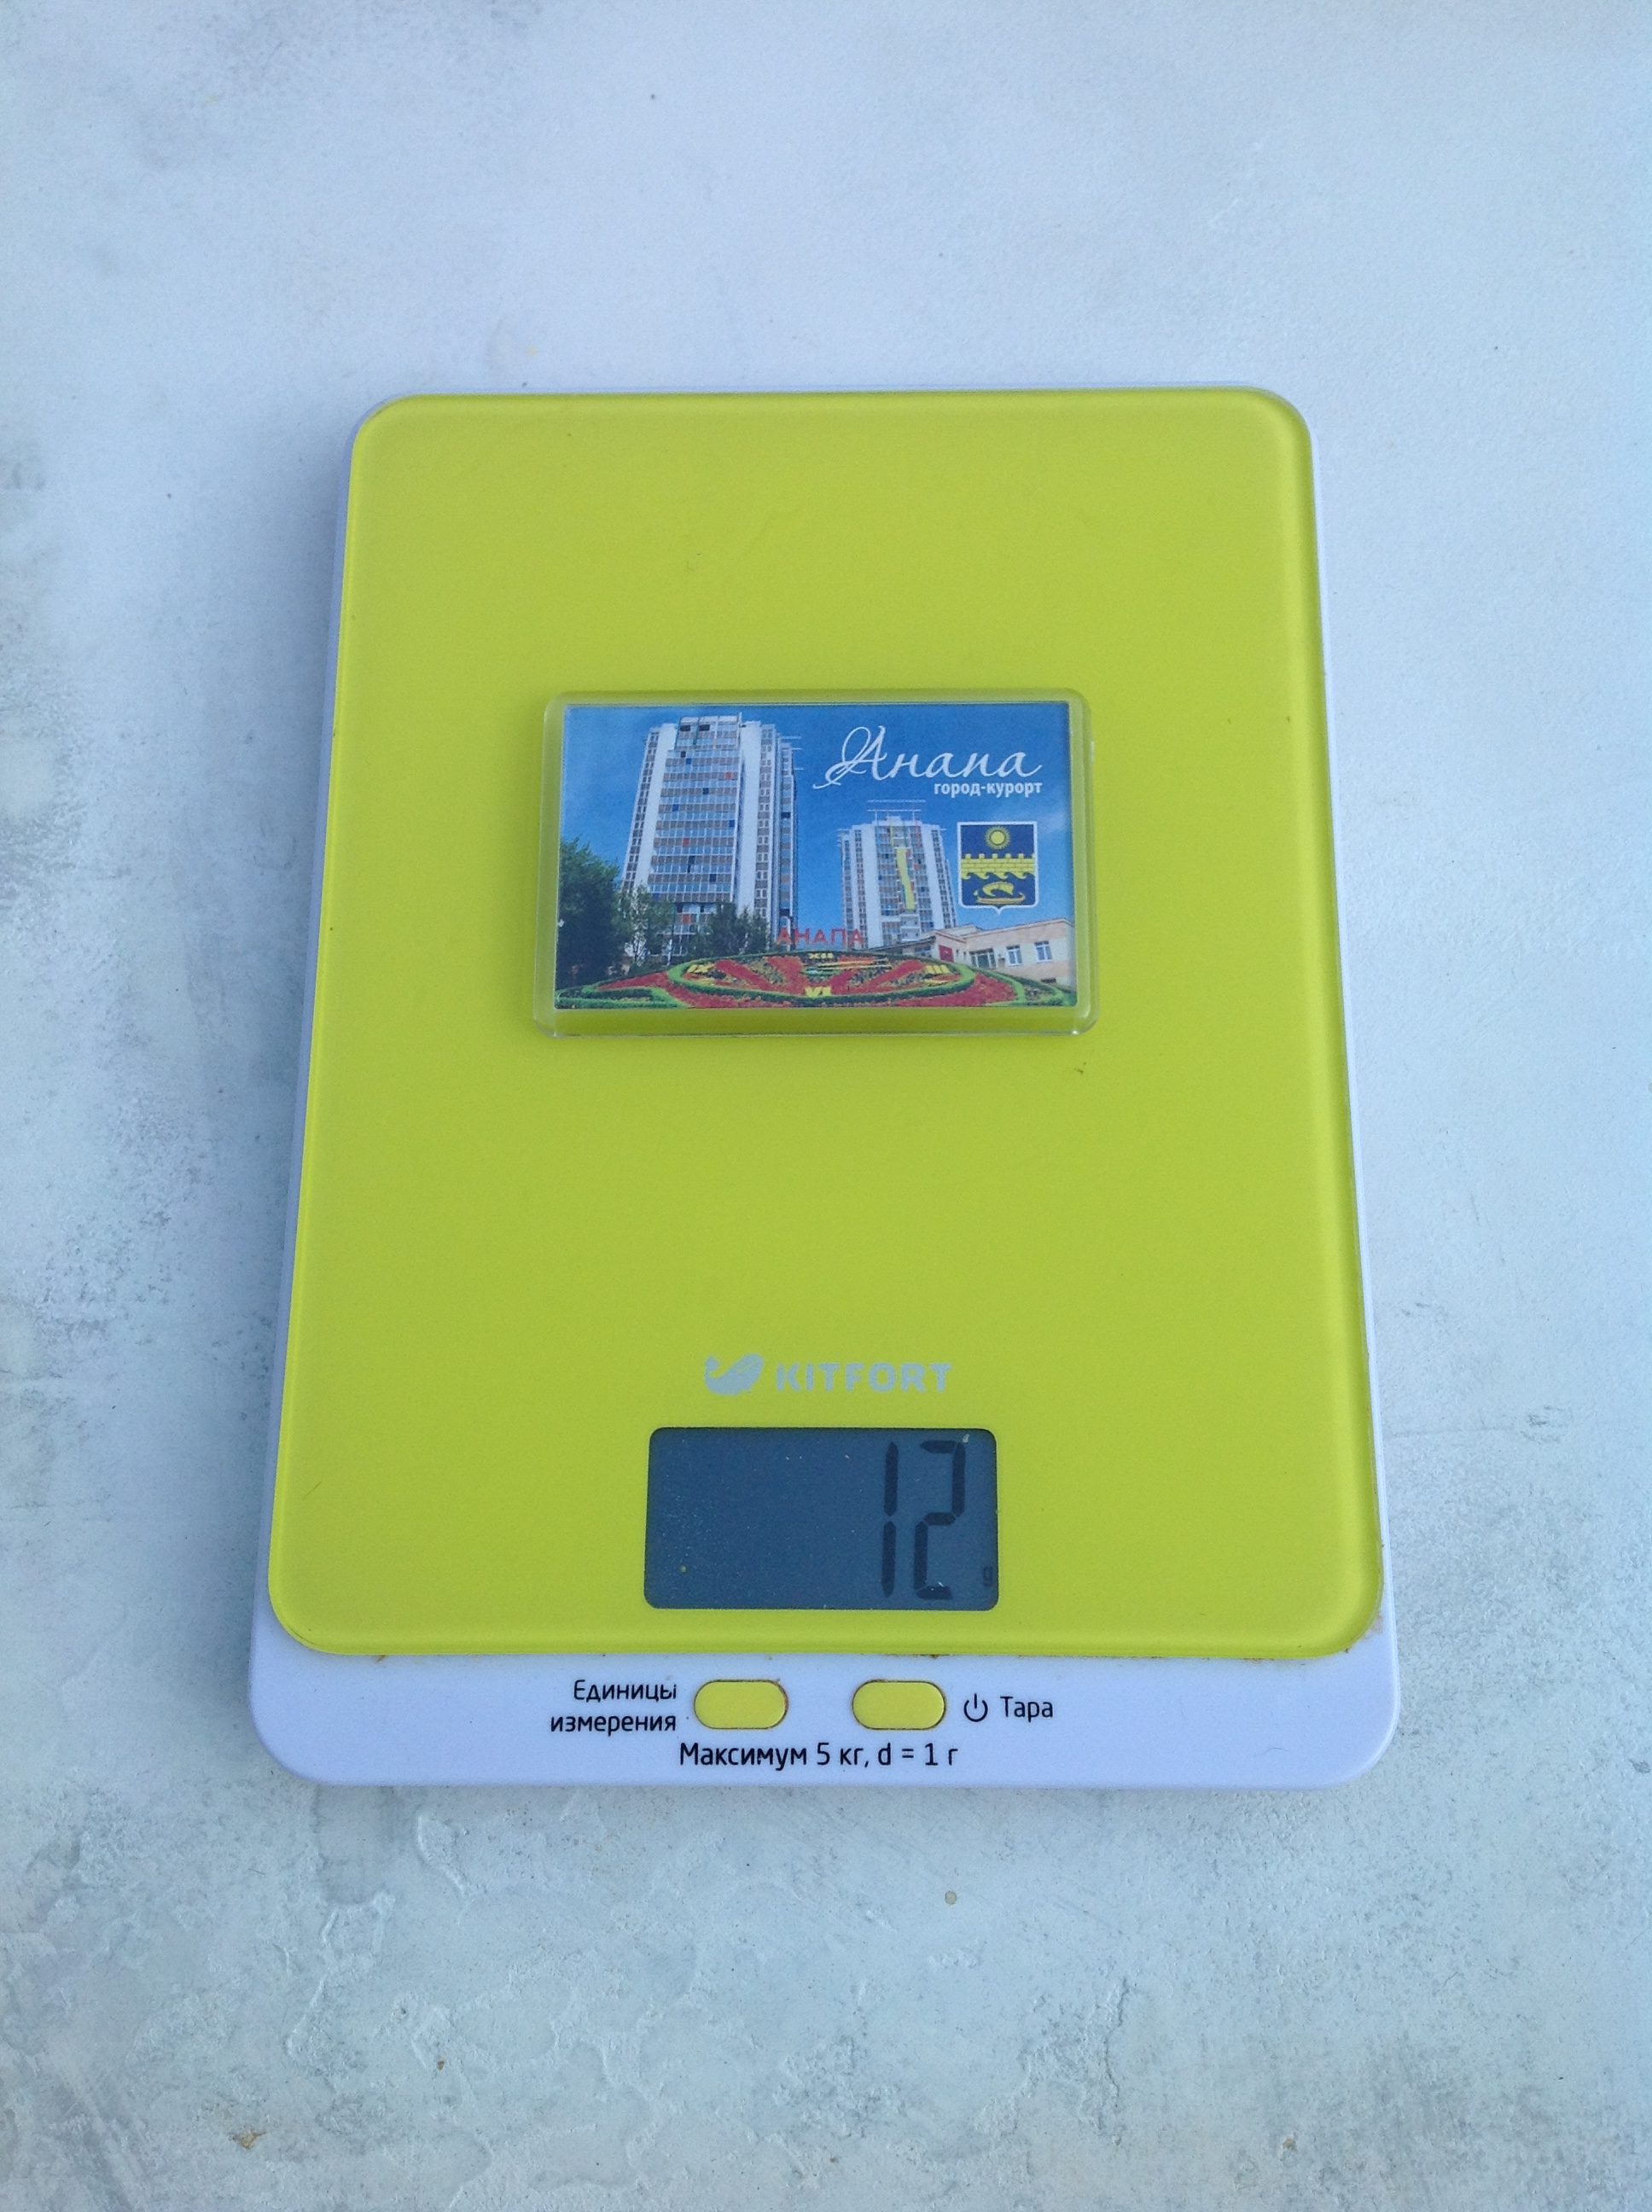 How much does a medium acrylic magnet weigh?